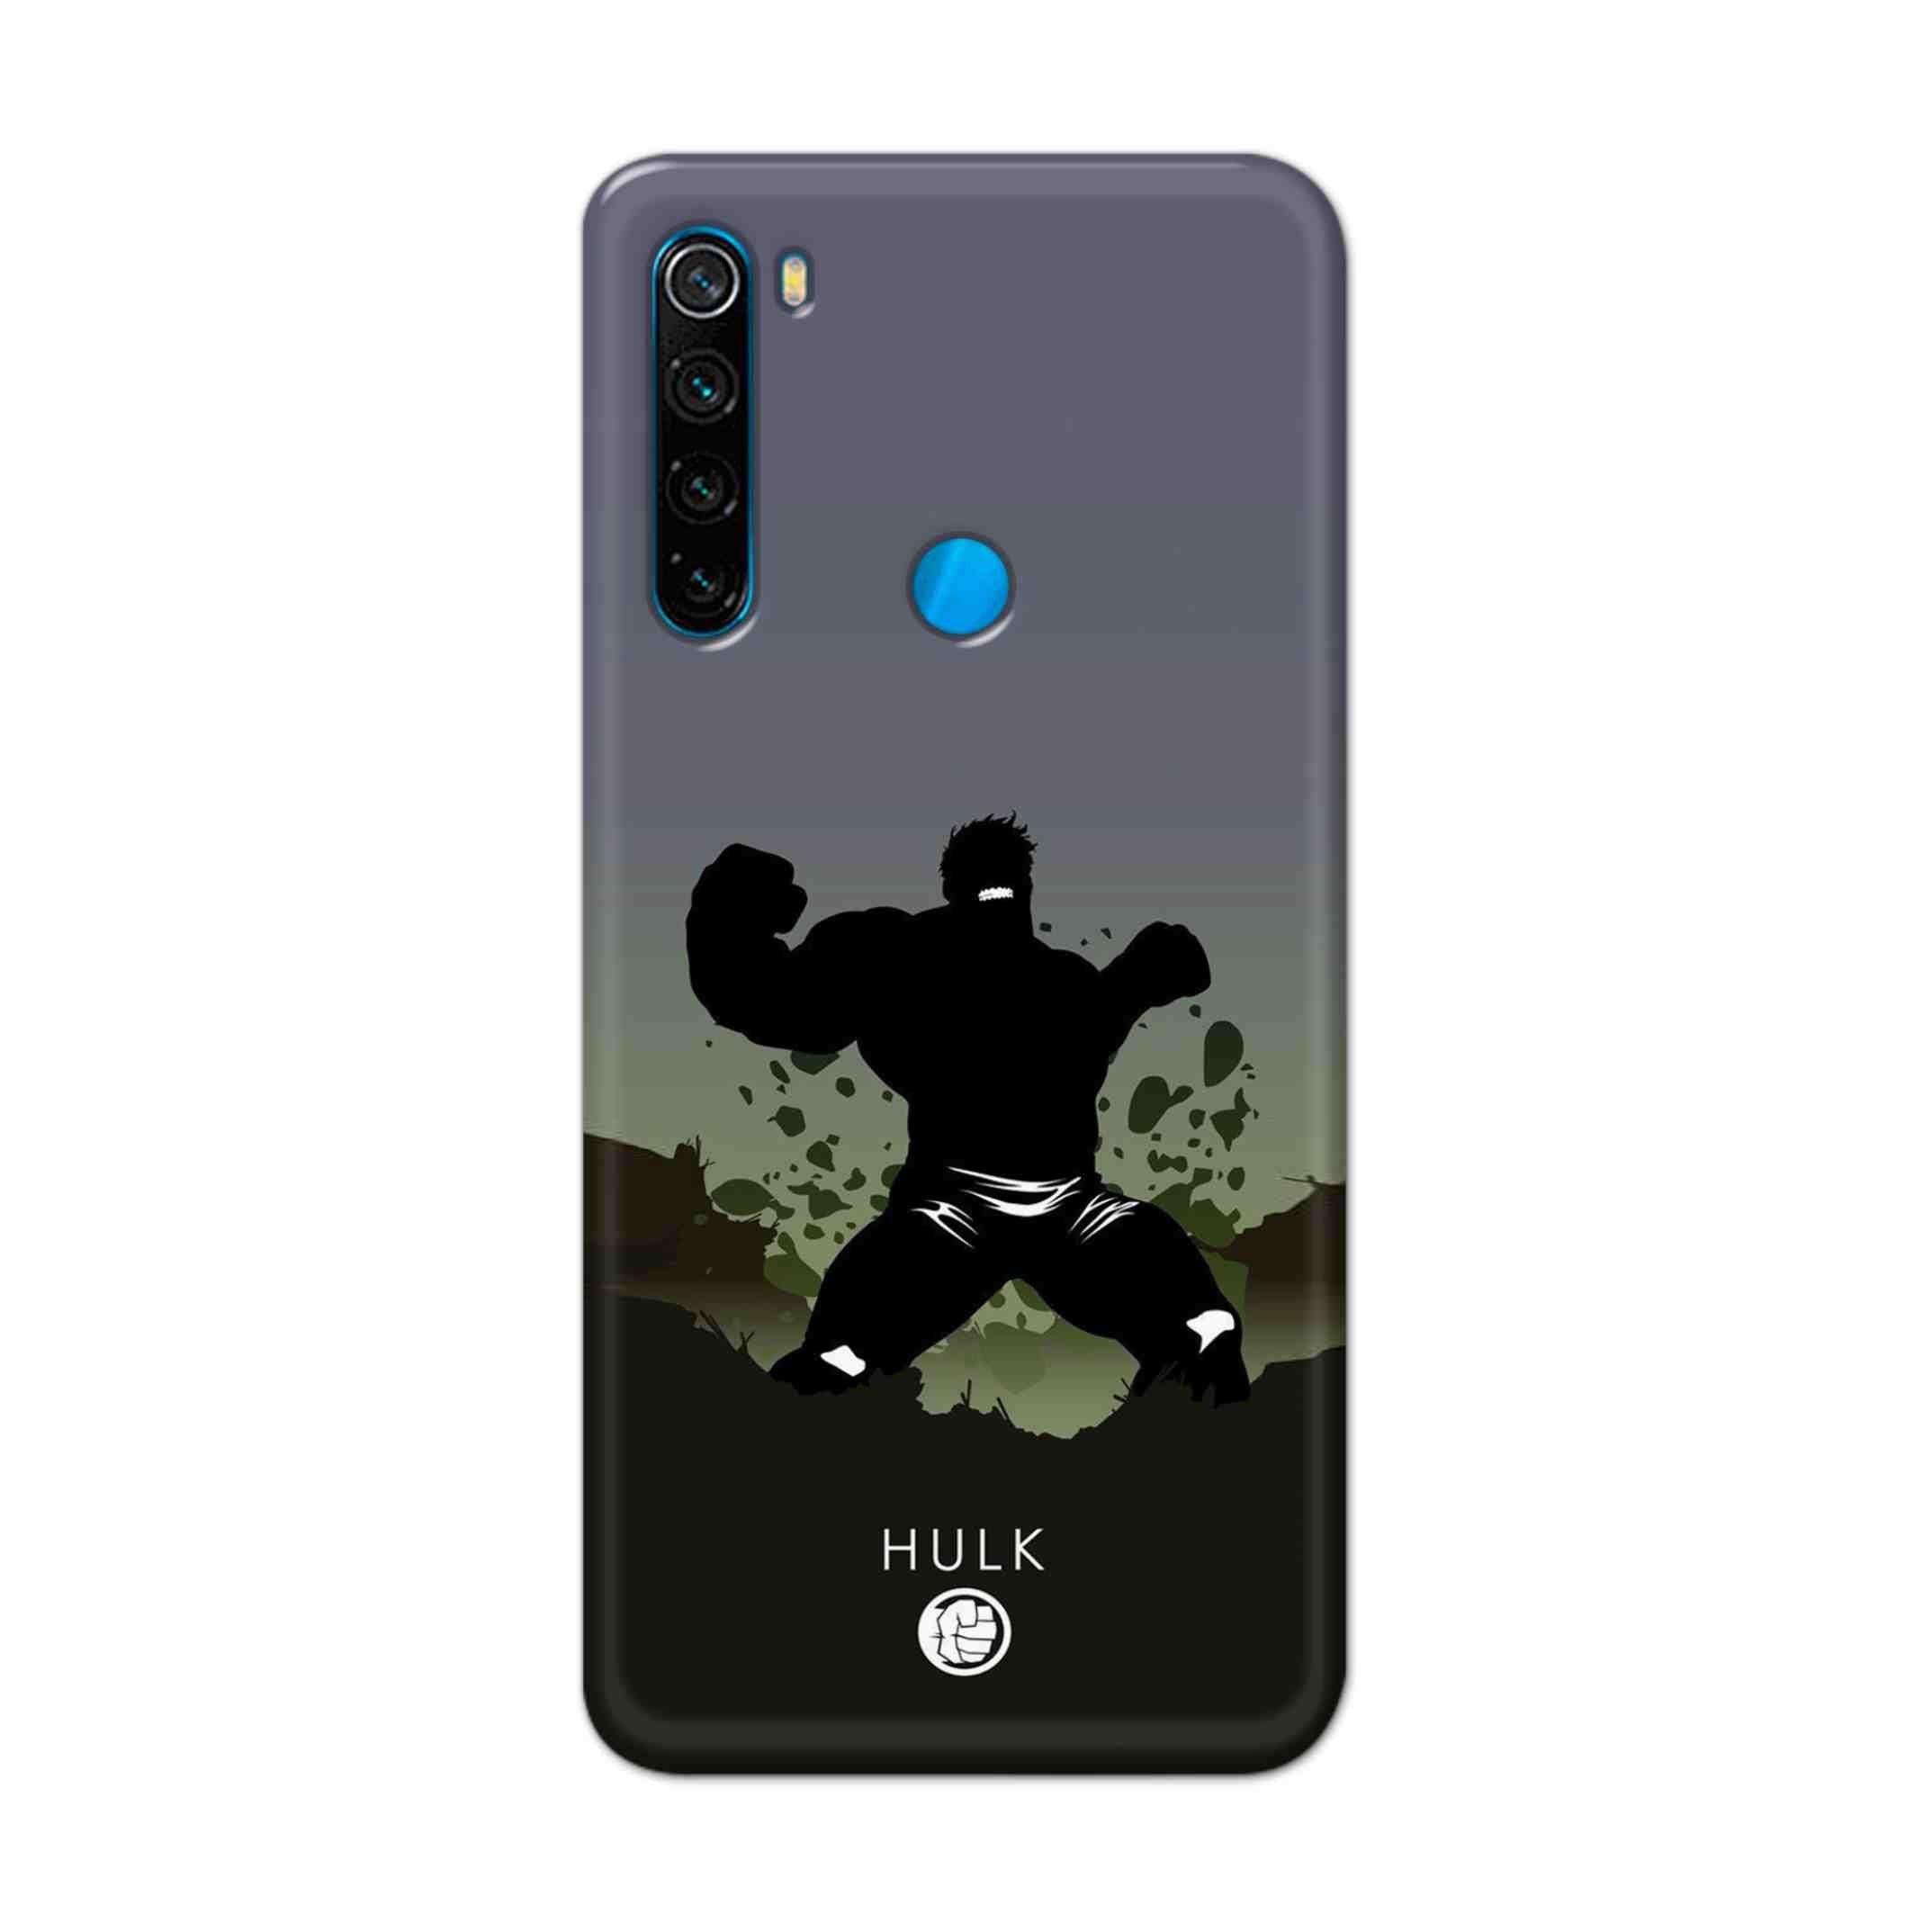 Buy Hulk Drax Hard Back Mobile Phone Case Cover For Xiaomi Redmi Note 8 Online